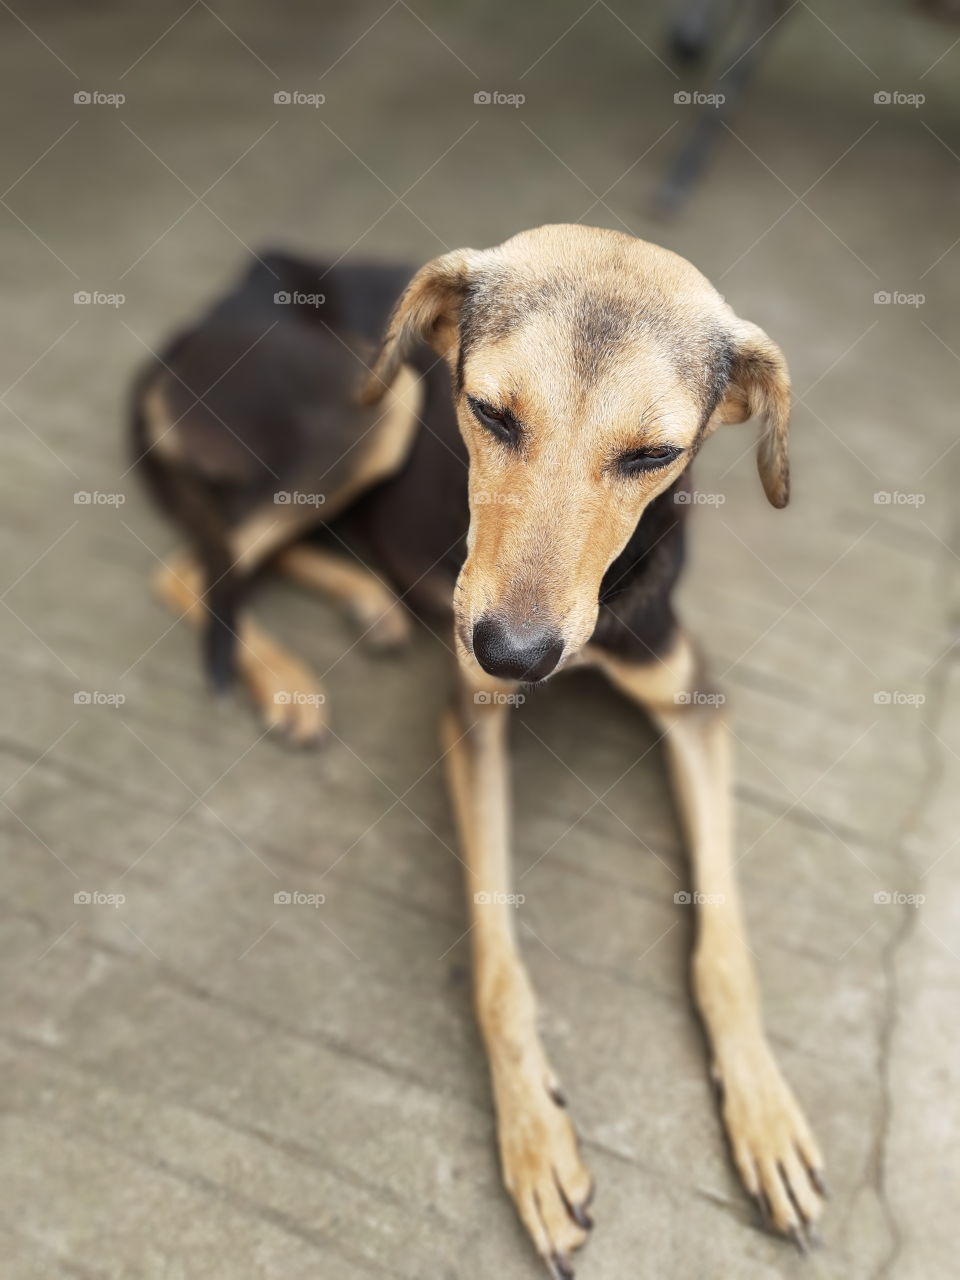 Indian Street dog. golden face with beautiful eyes in relaxed position.